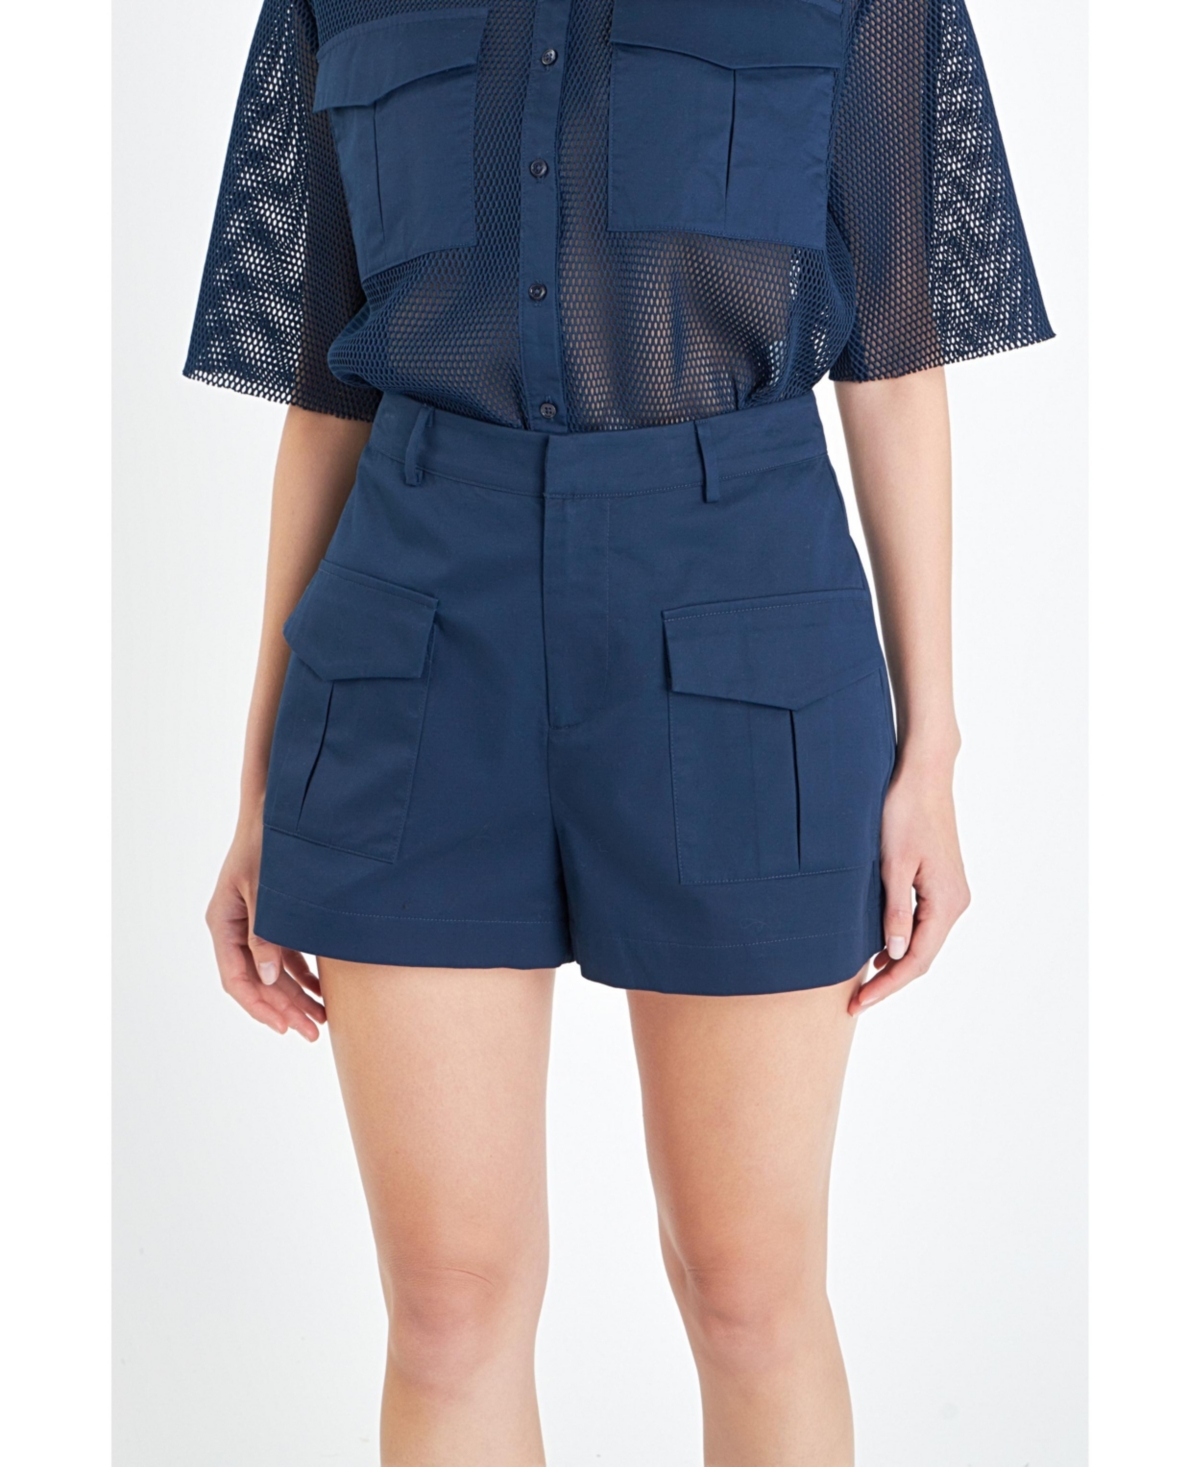 Women's High-Waisted Shorts with Pockets - Navy